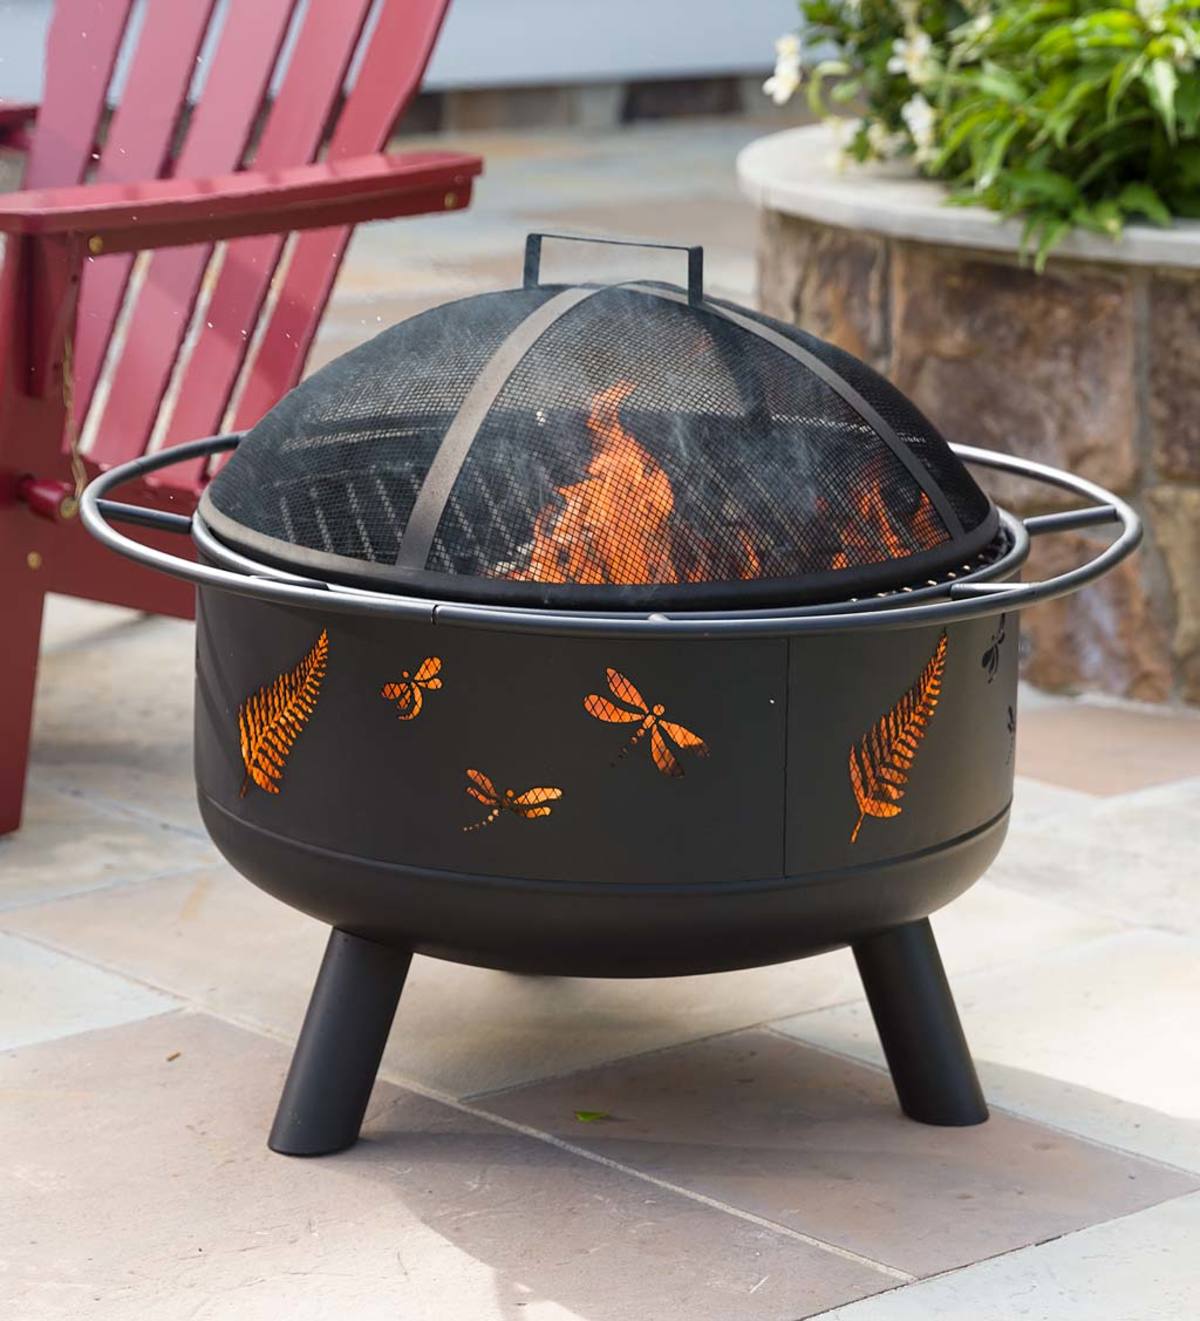 Dragonfly Wood Burning Fire Pit, How To Burn Wood In Fire Pit